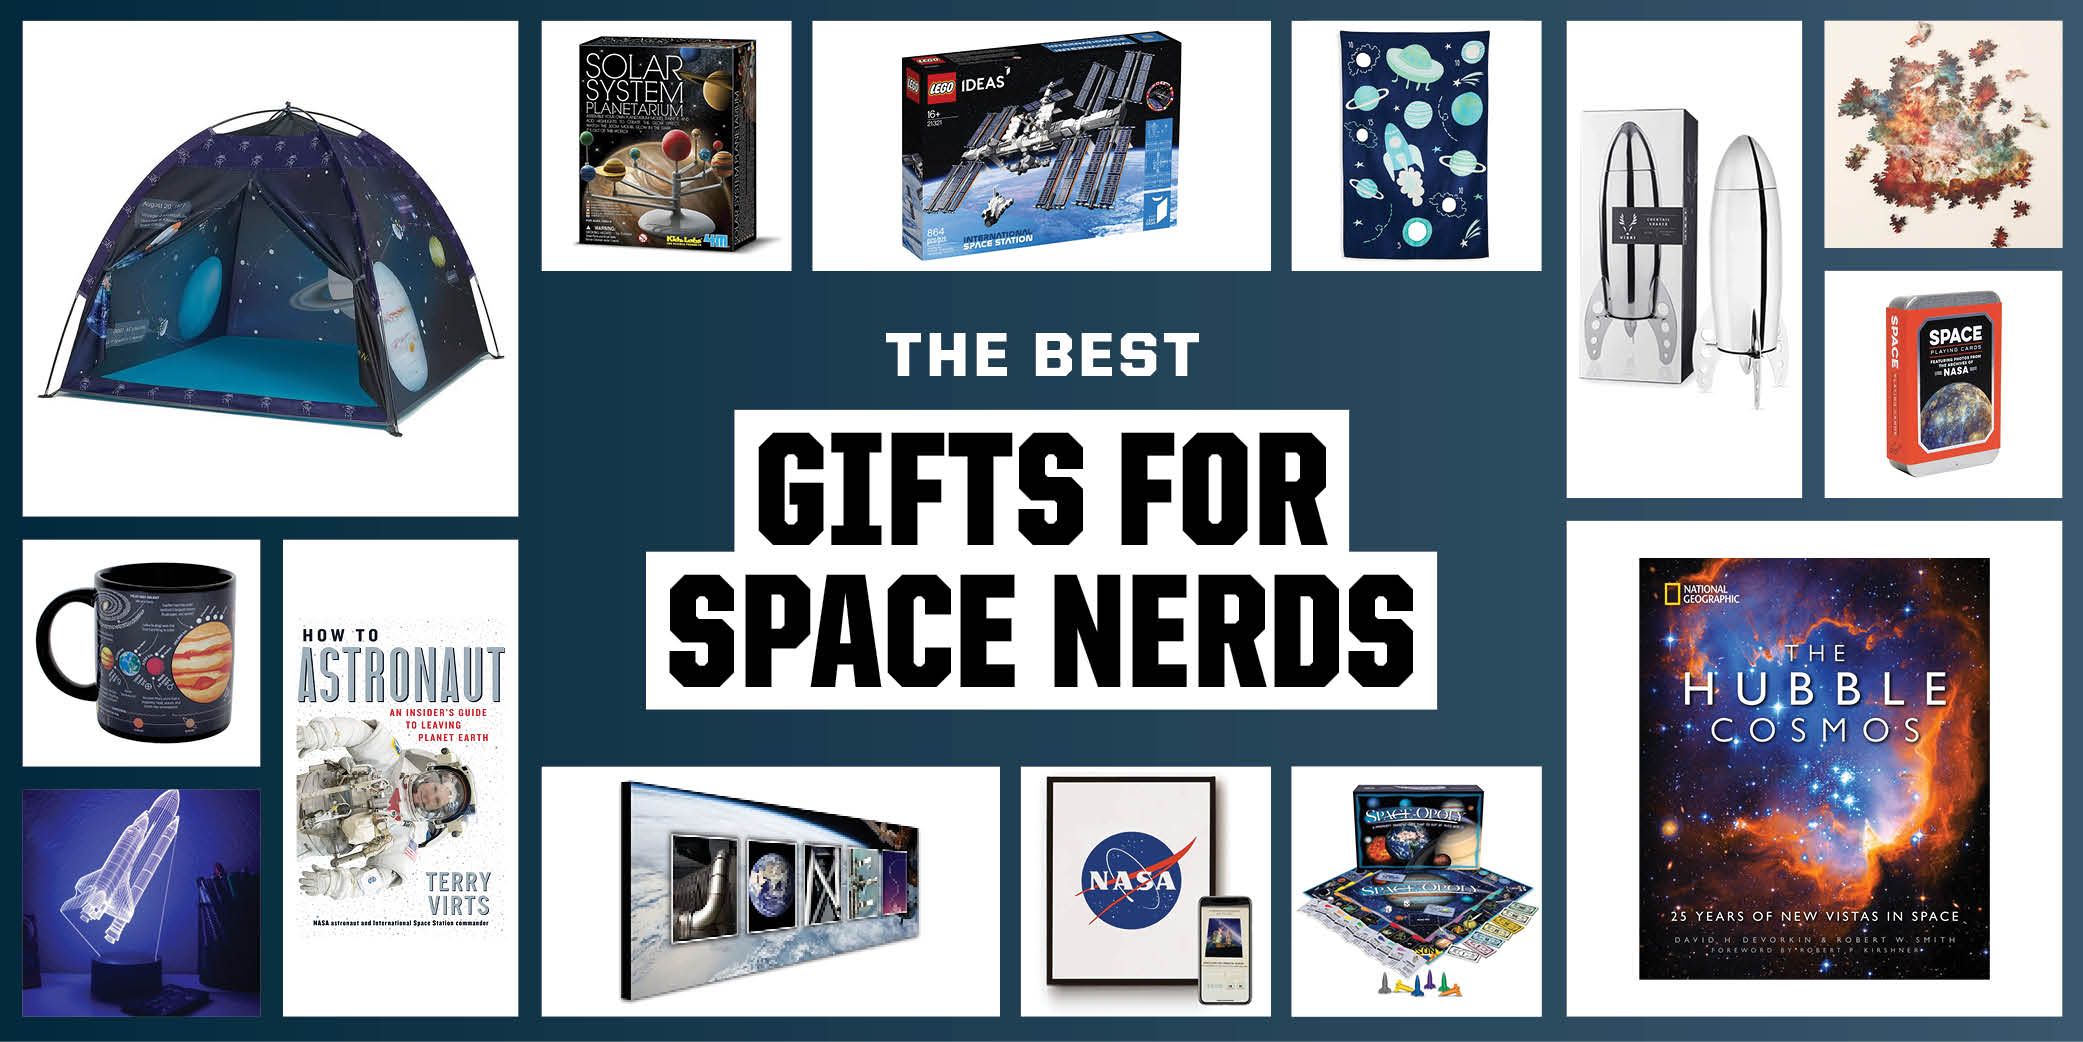 III. Unique and Creative Gifts for Astronomy and Space Enthusiasts